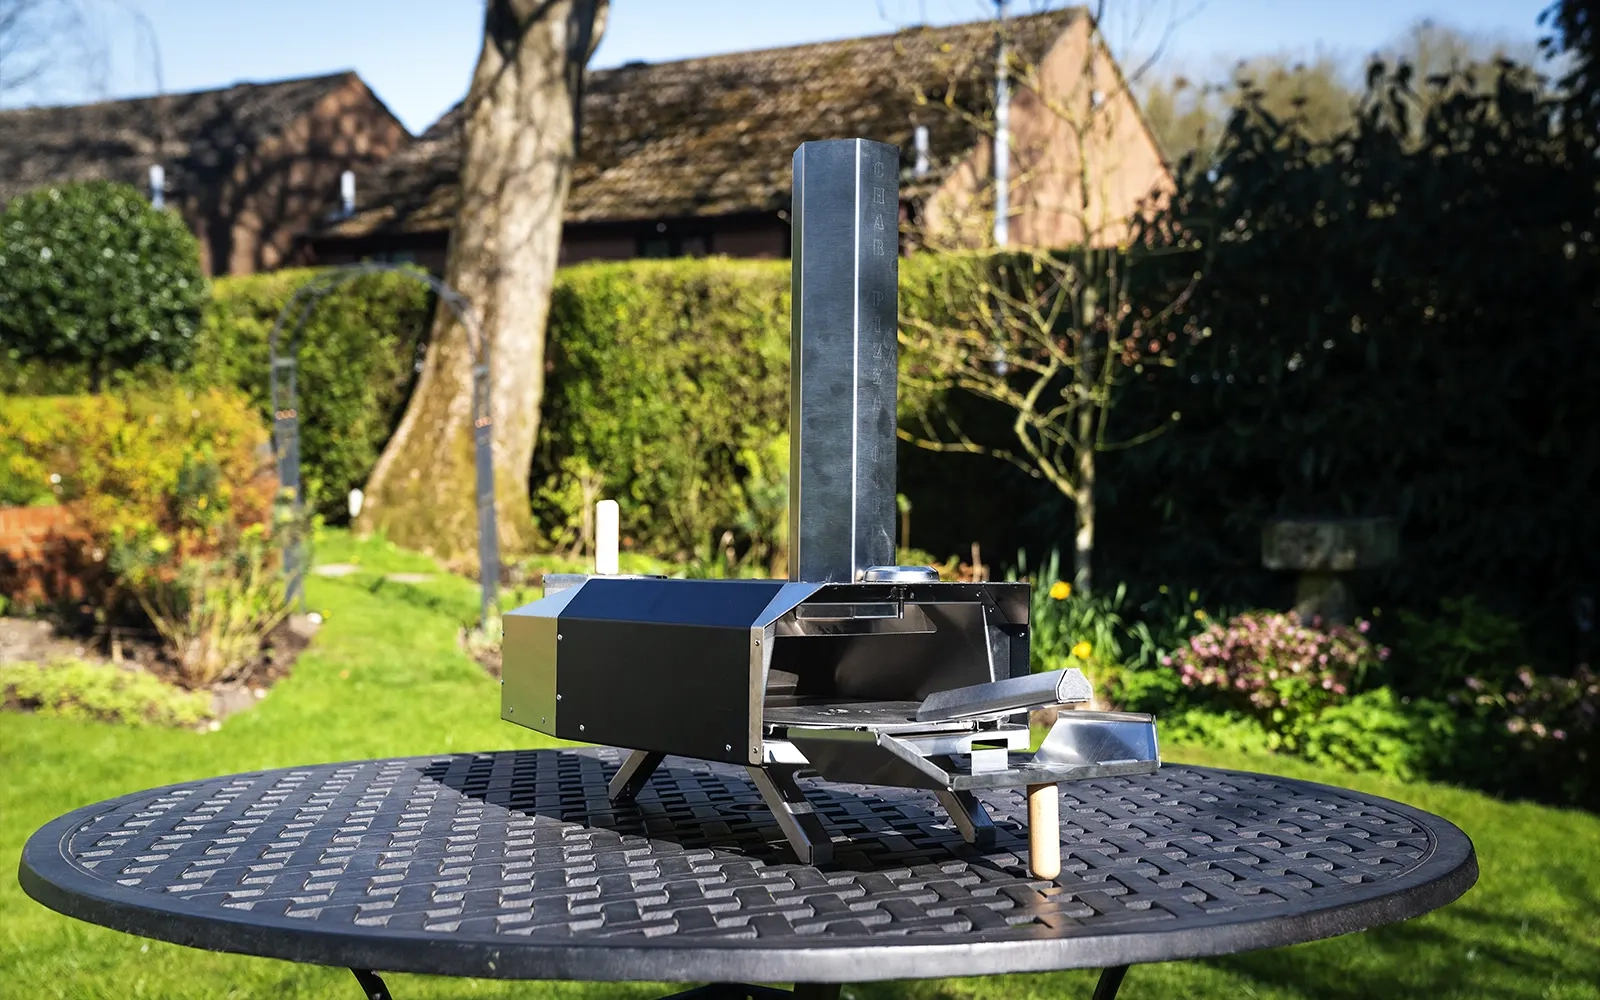 Pizza oven on a stainless steel table in a garden setting